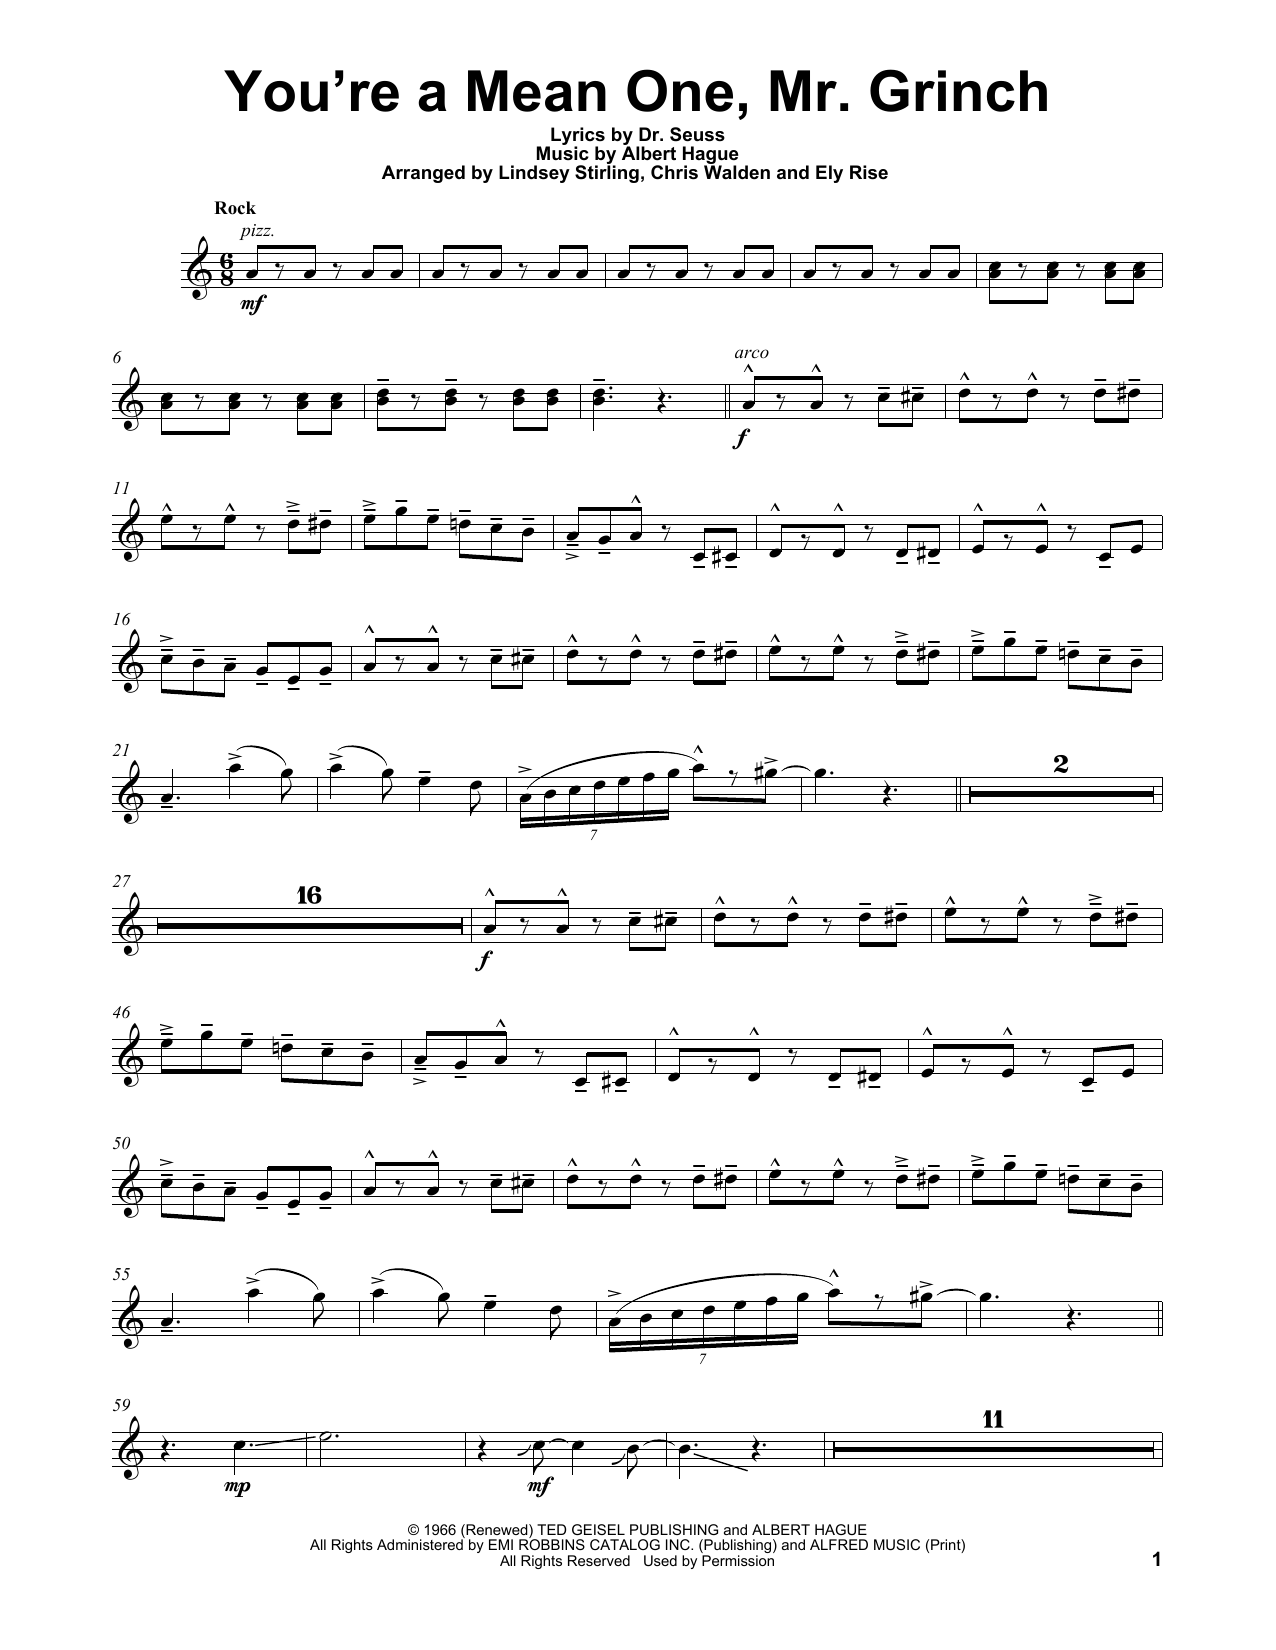 Download Lindsey Stirling You're A Mean One, Mr. Grinch Sheet Music